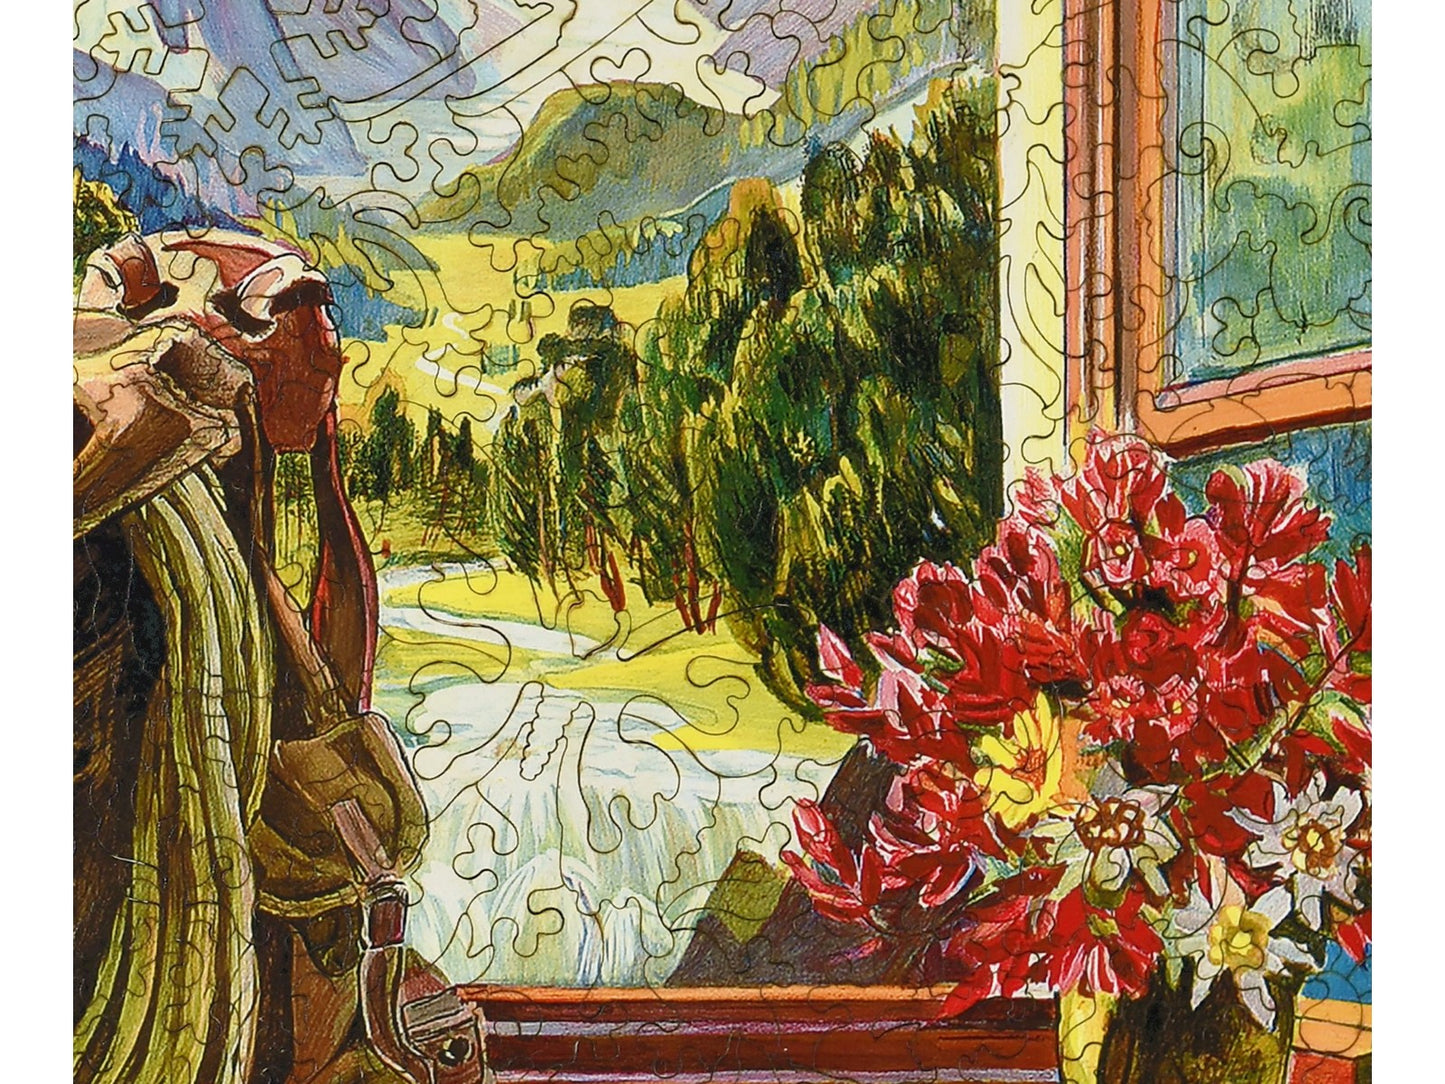 A closeup of the front of the puzzle, Pontresina Travel Poster, showing the detail in the pieces.